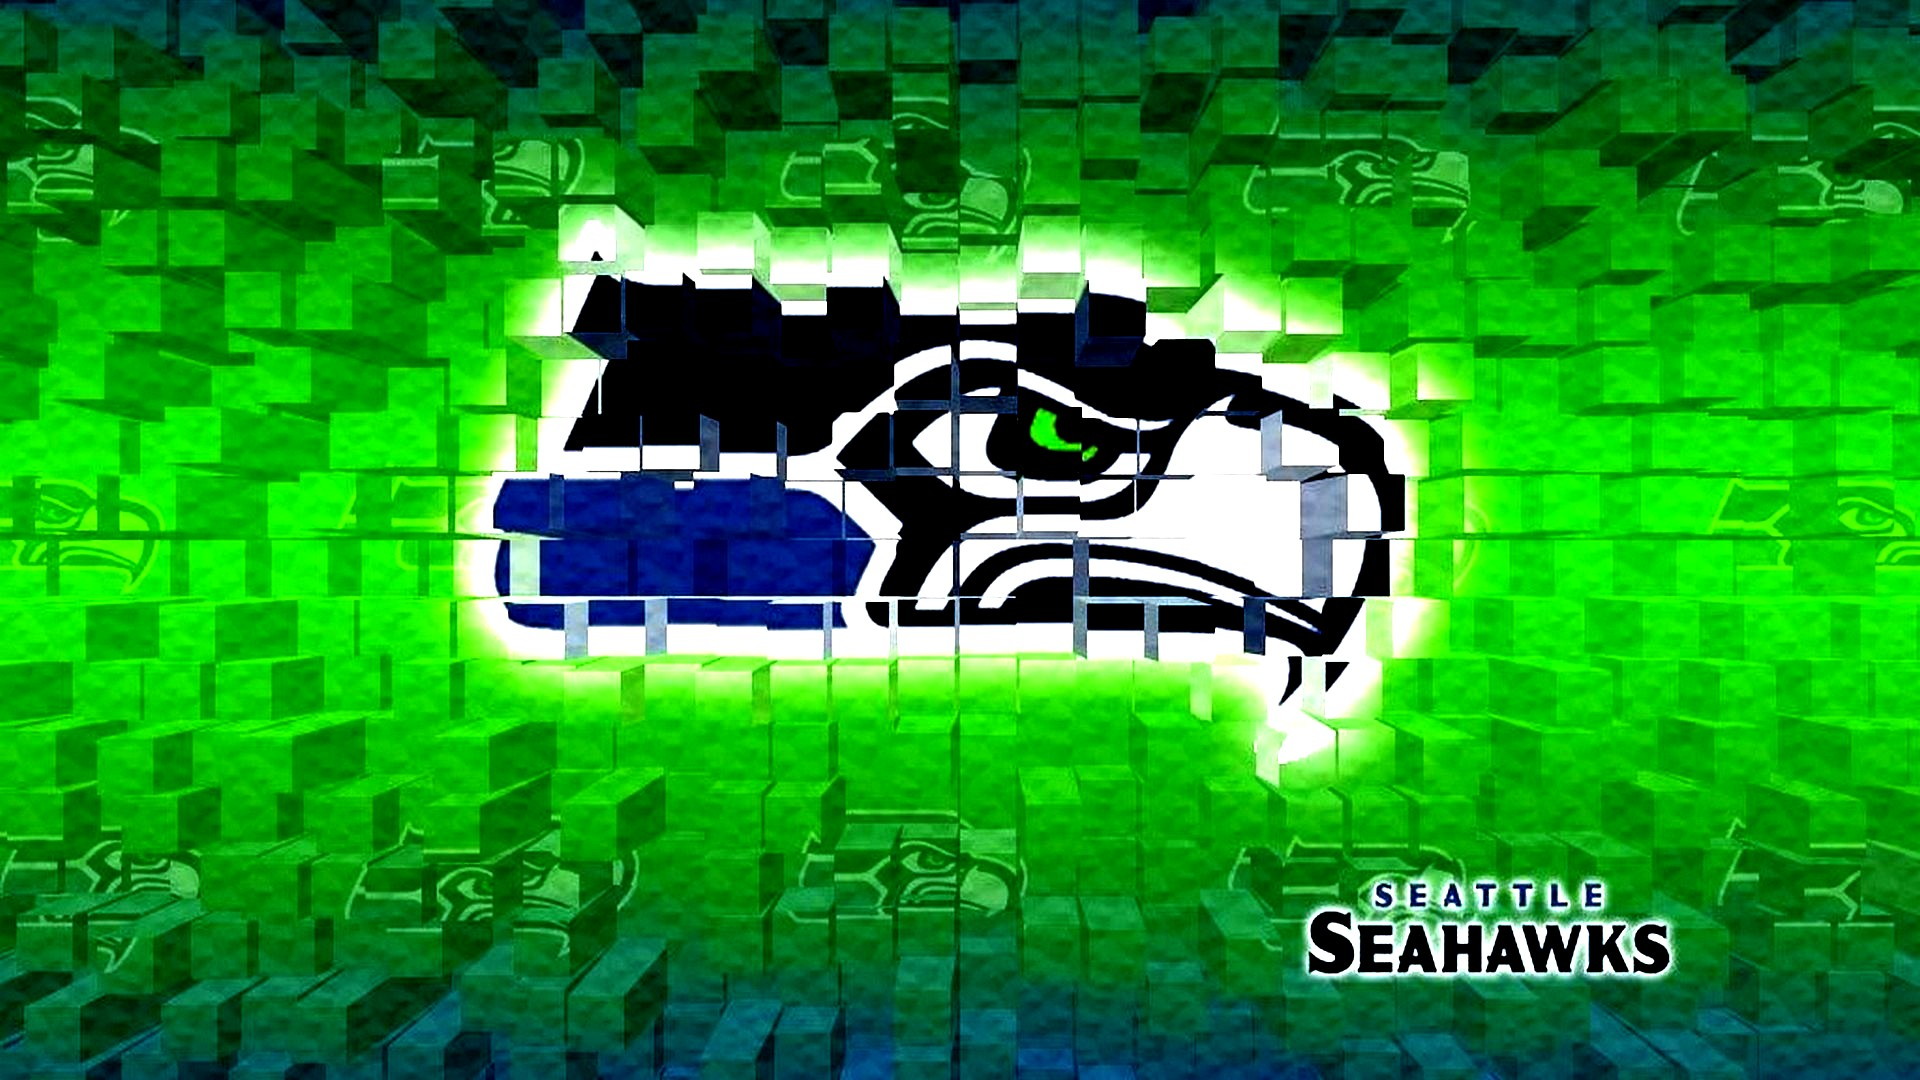 Seattle Seahawks Wallpaper HD Laptop with high-resolution 1920x1080 pixel. You can use and set as wallpaper for Notebook Screensavers, Mac Wallpapers, Mobile Home Screen, iPhone or Android Phones Lock Screen